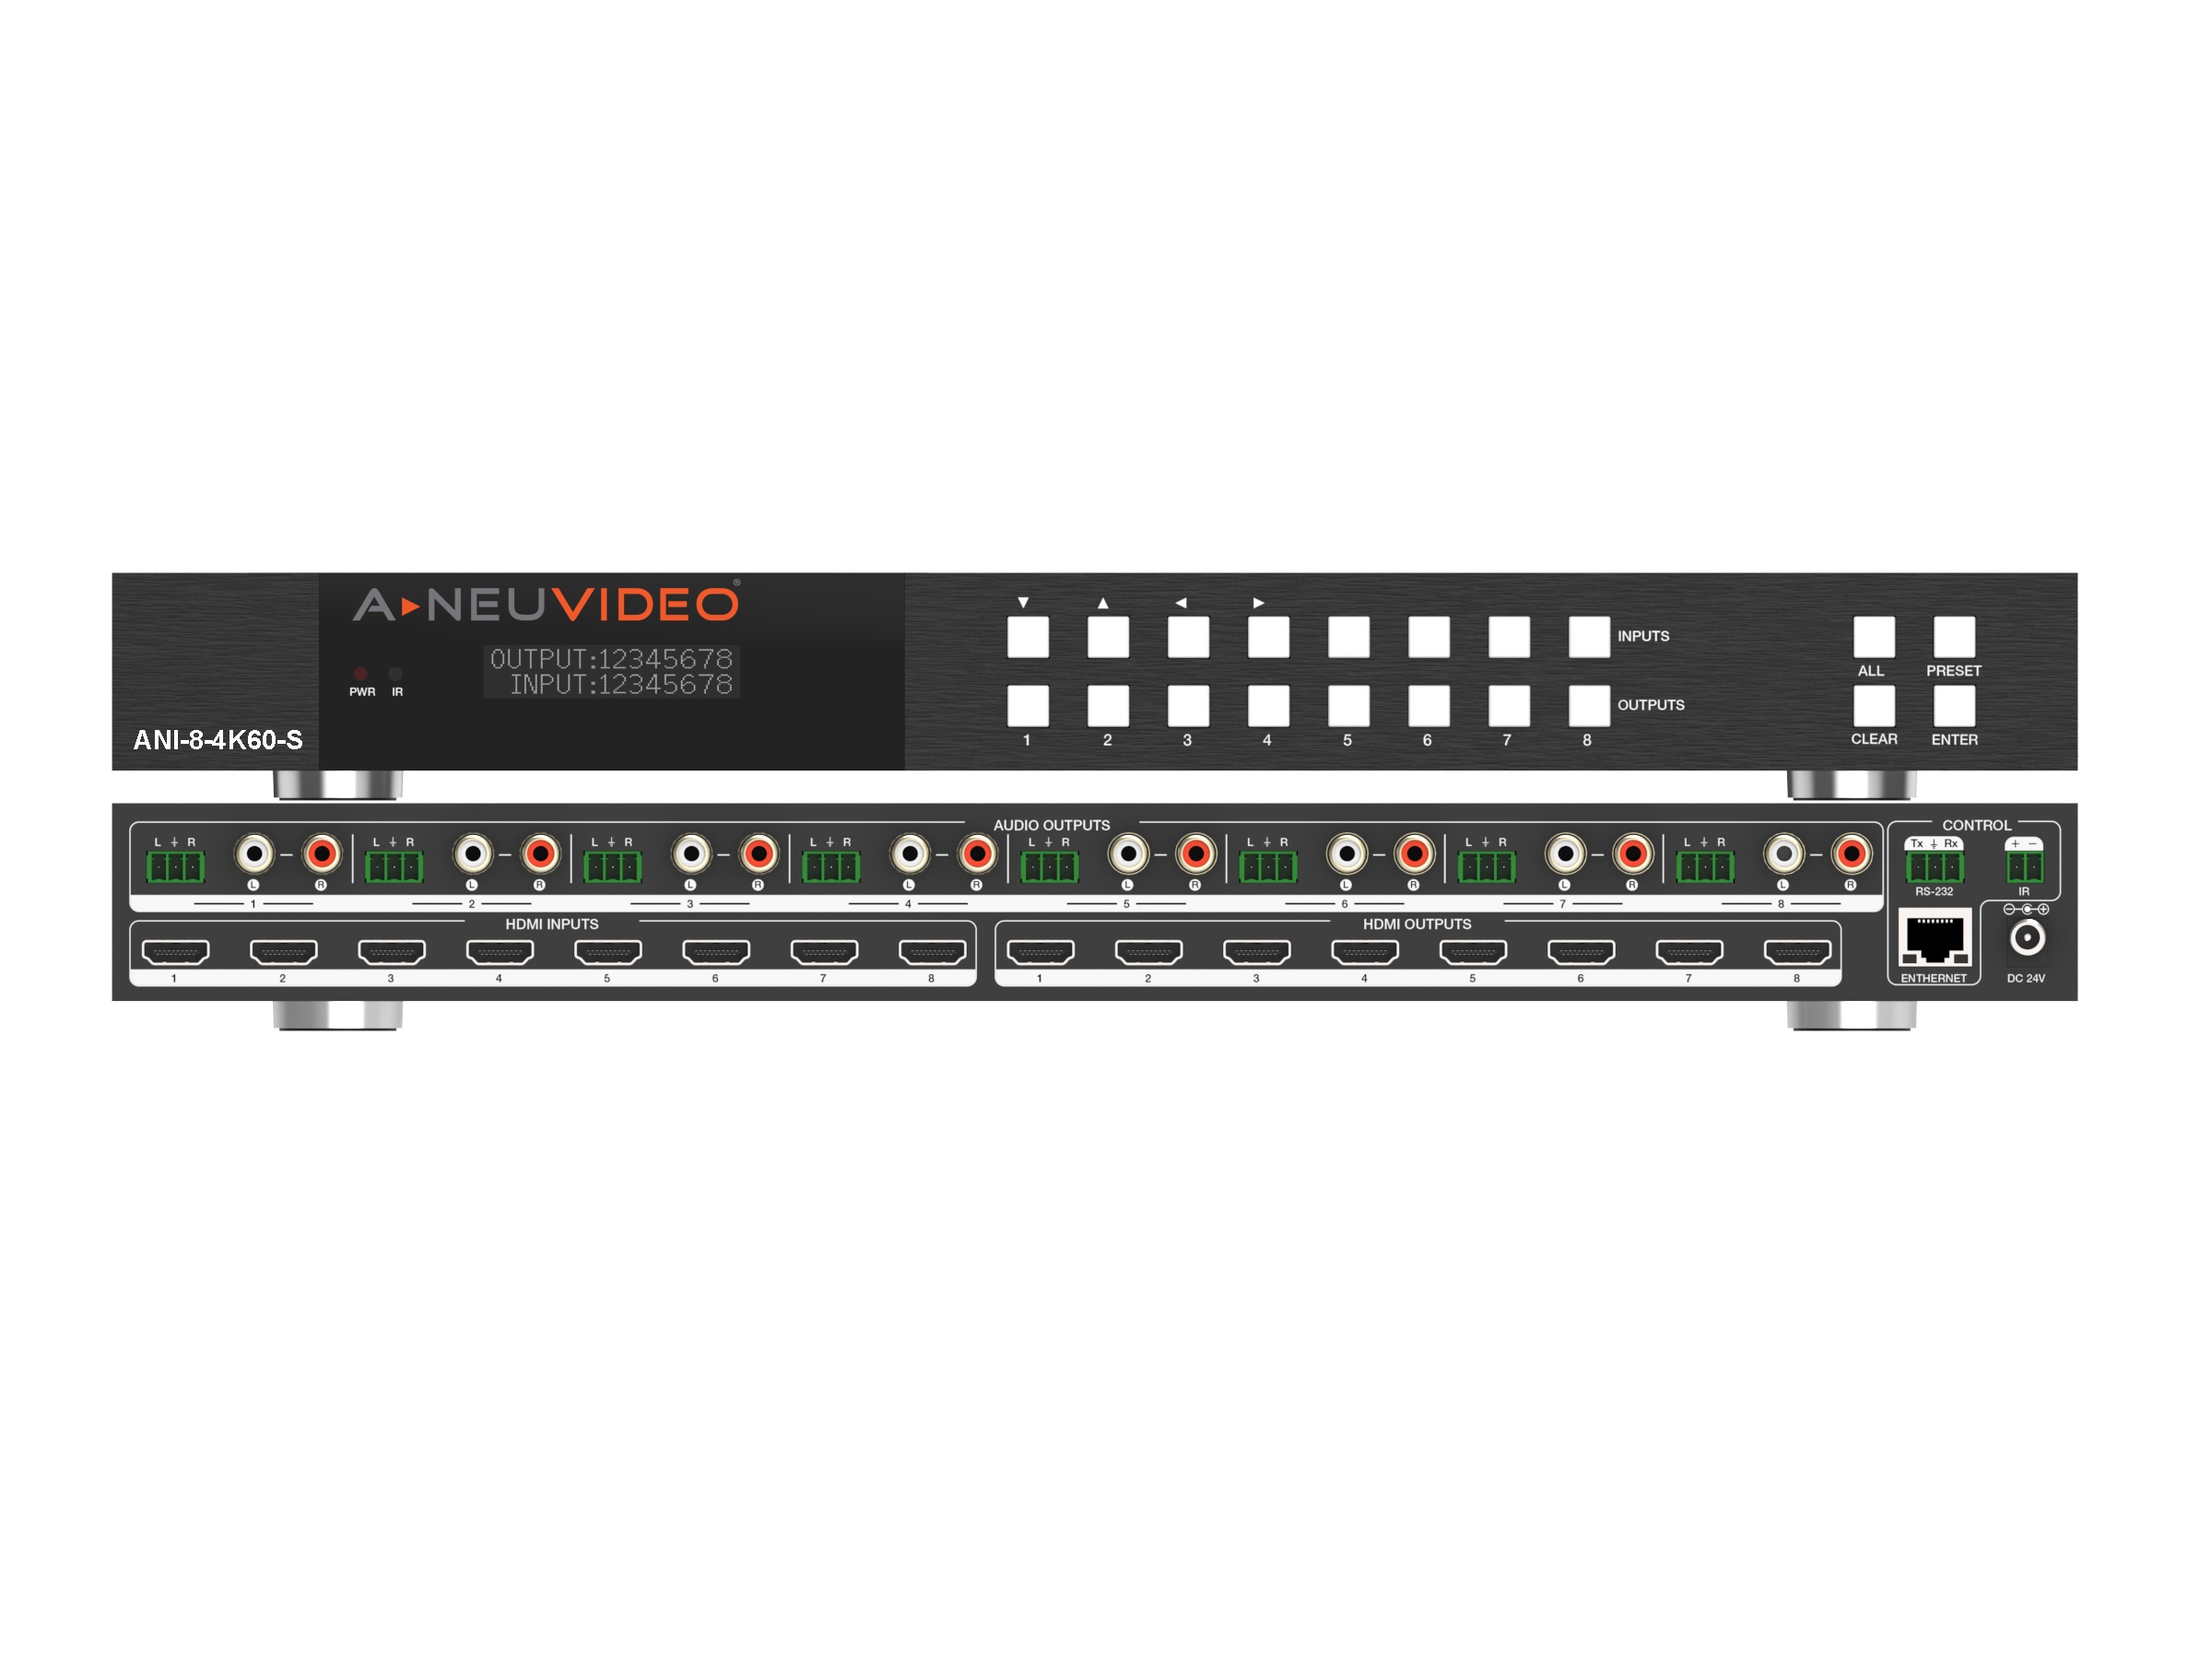 A-NeuVideo ANI-8-4K60-S 8x8 UHD 4K/60Hz HDMI Matrix Switcher with Scaler and Audio Extractor